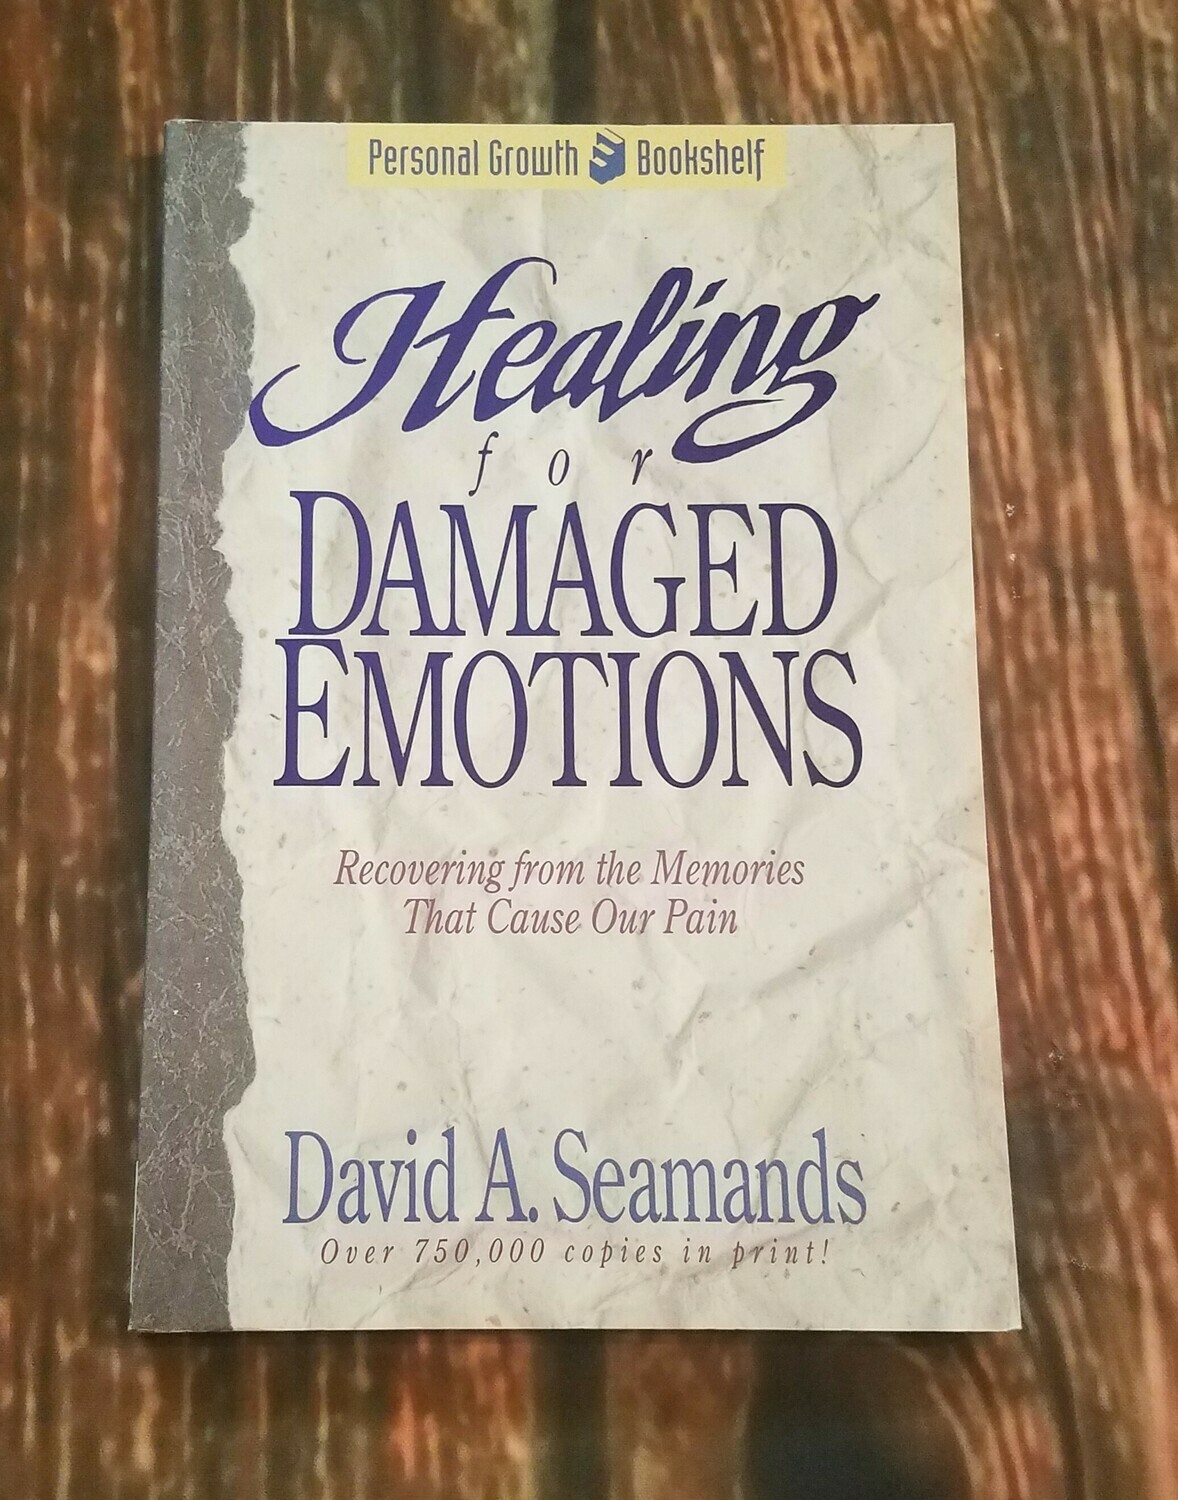 Healing for Damaged Emotions by David A. Seamands